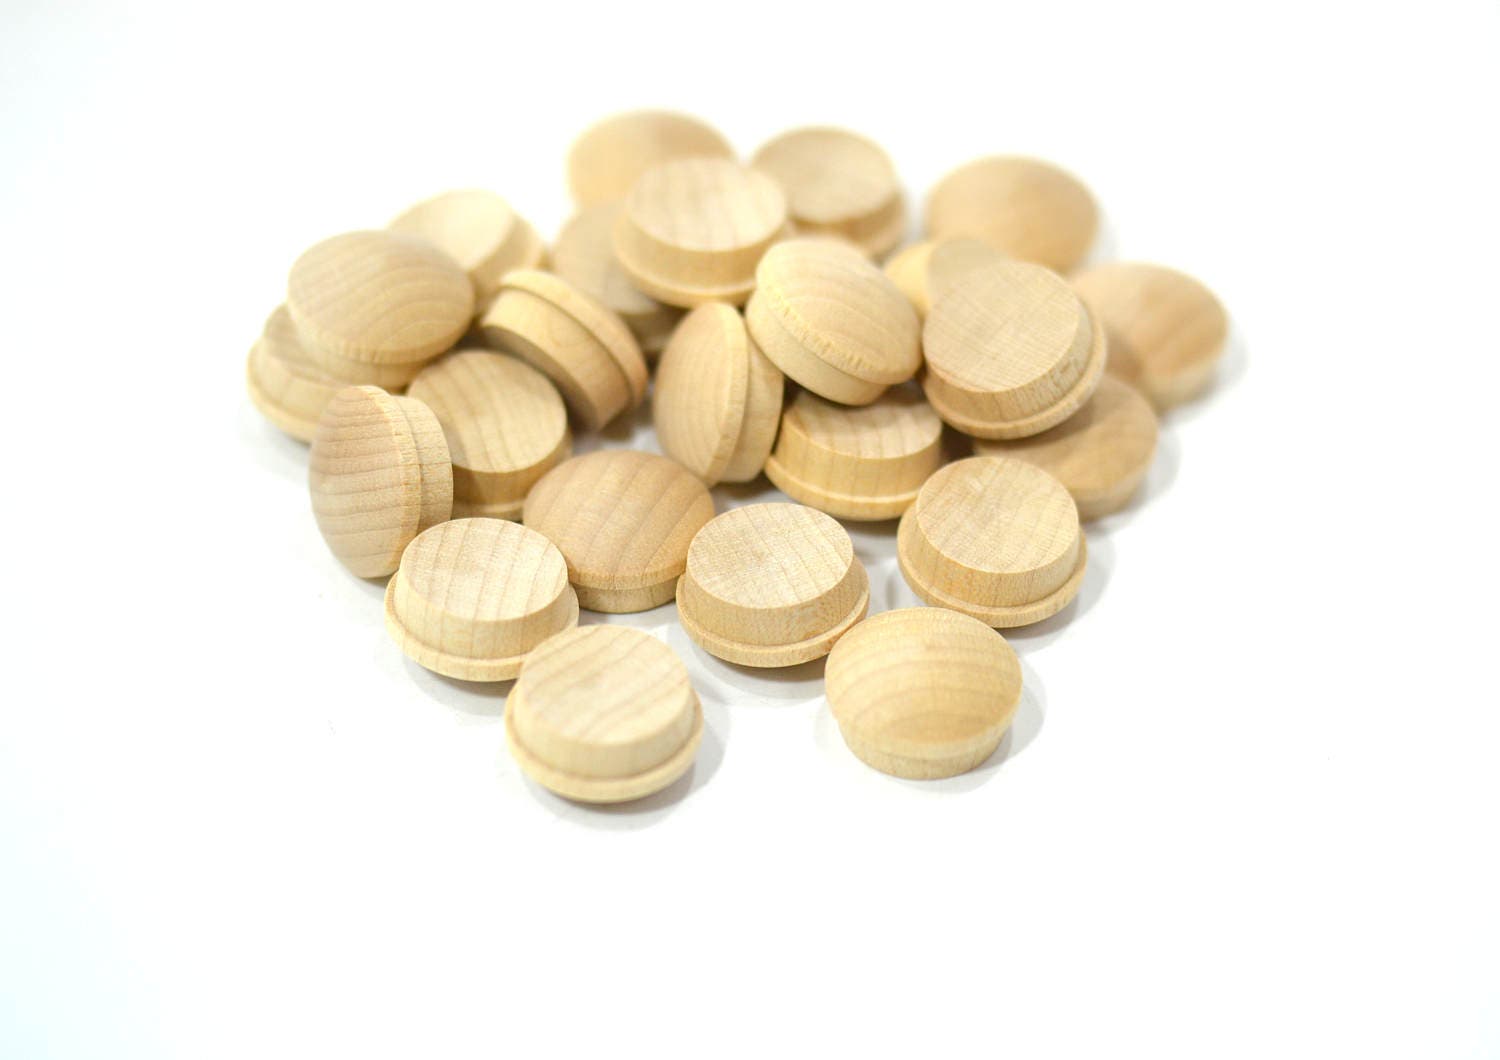 18 mm MUSHROOM Plugs  Wooden Solid Covering Screw Heads FREE PP Button Token DIY 